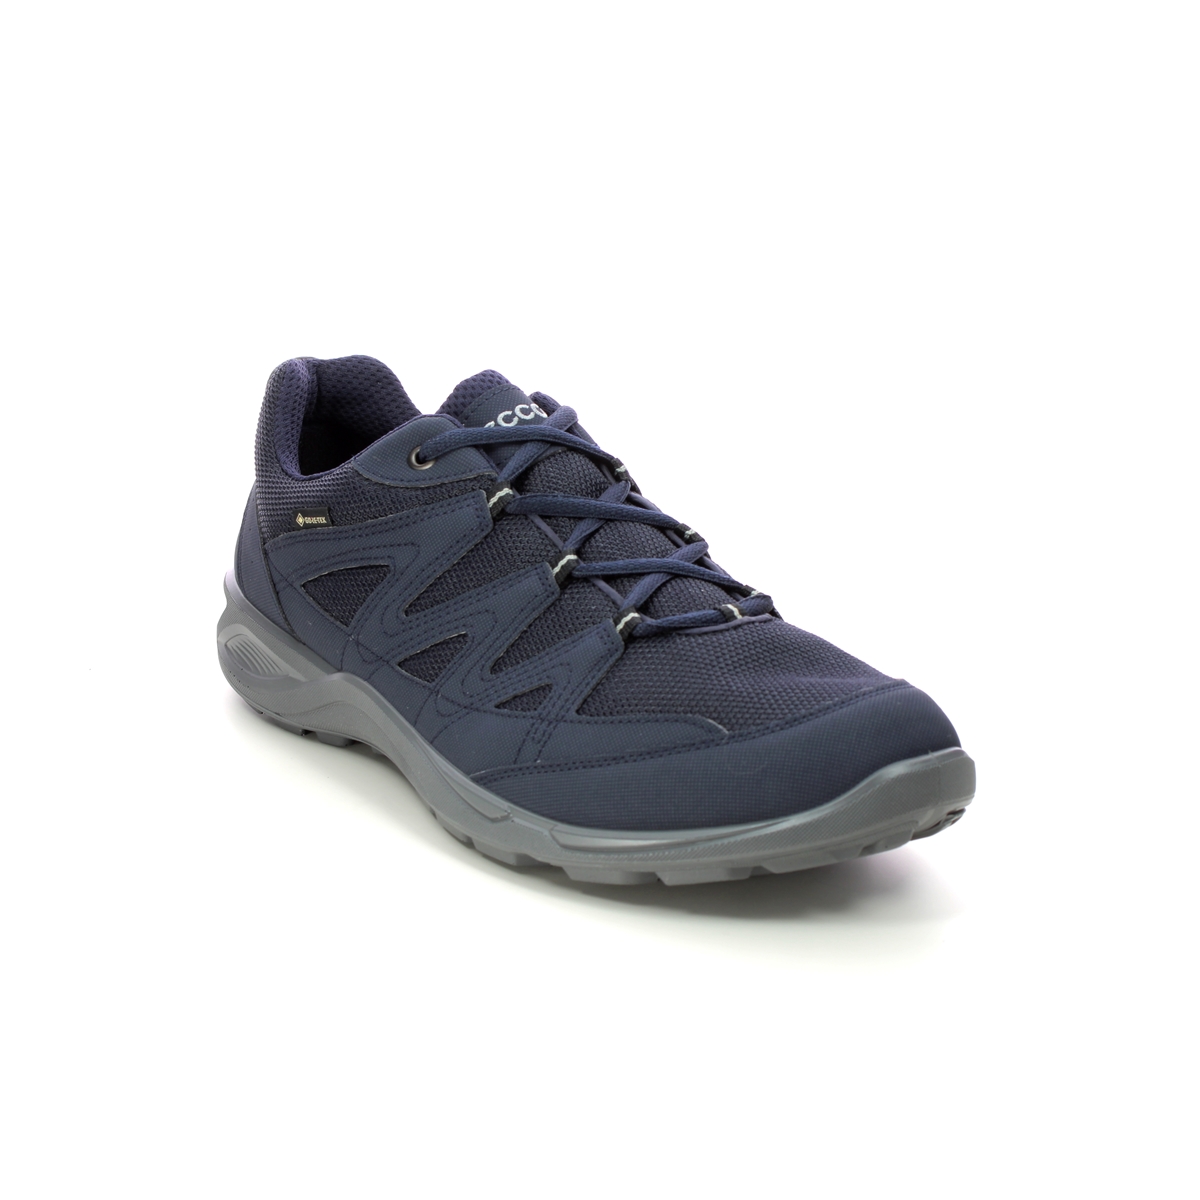 Ecco Terracruise Light Gtx Mens Navy Mens Trainers 825784-50769 In Size 44 In Plain Navy